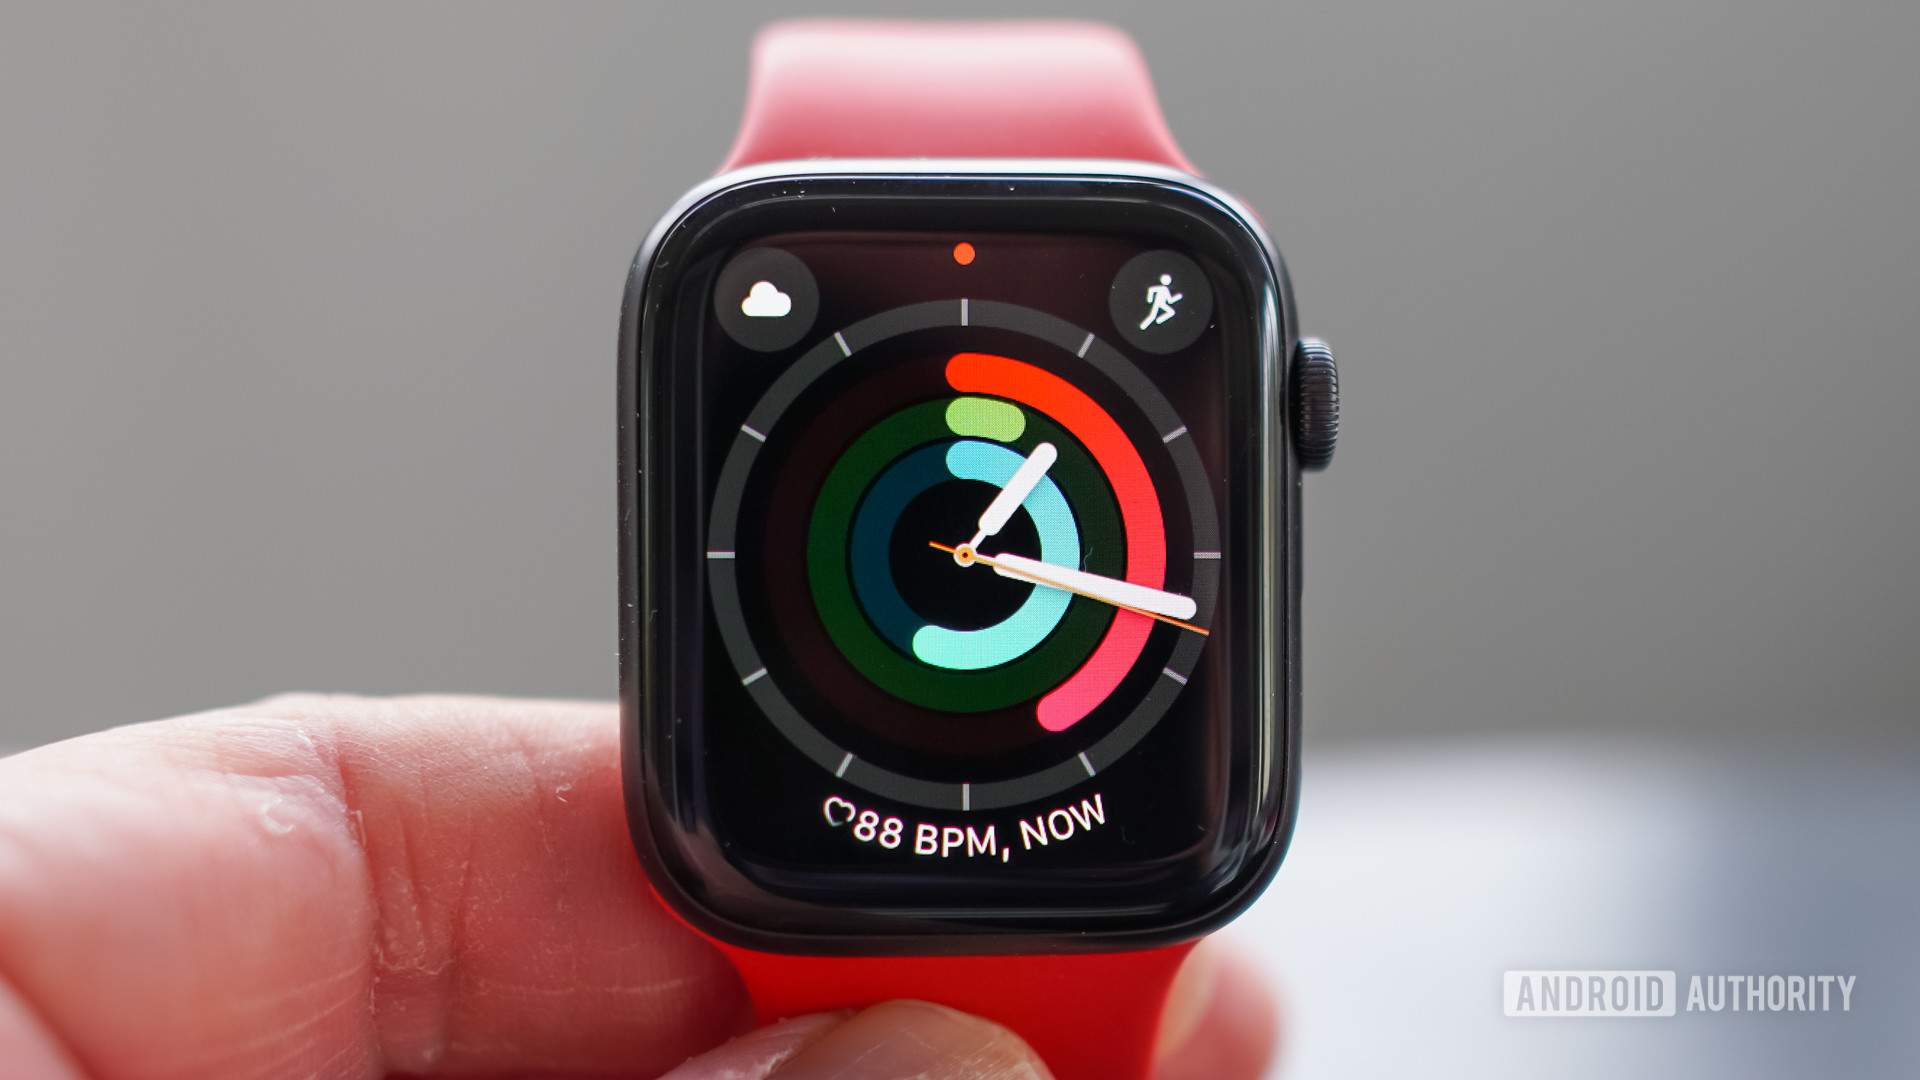 A user holds an Apple Watch SE display the activity rings watch face